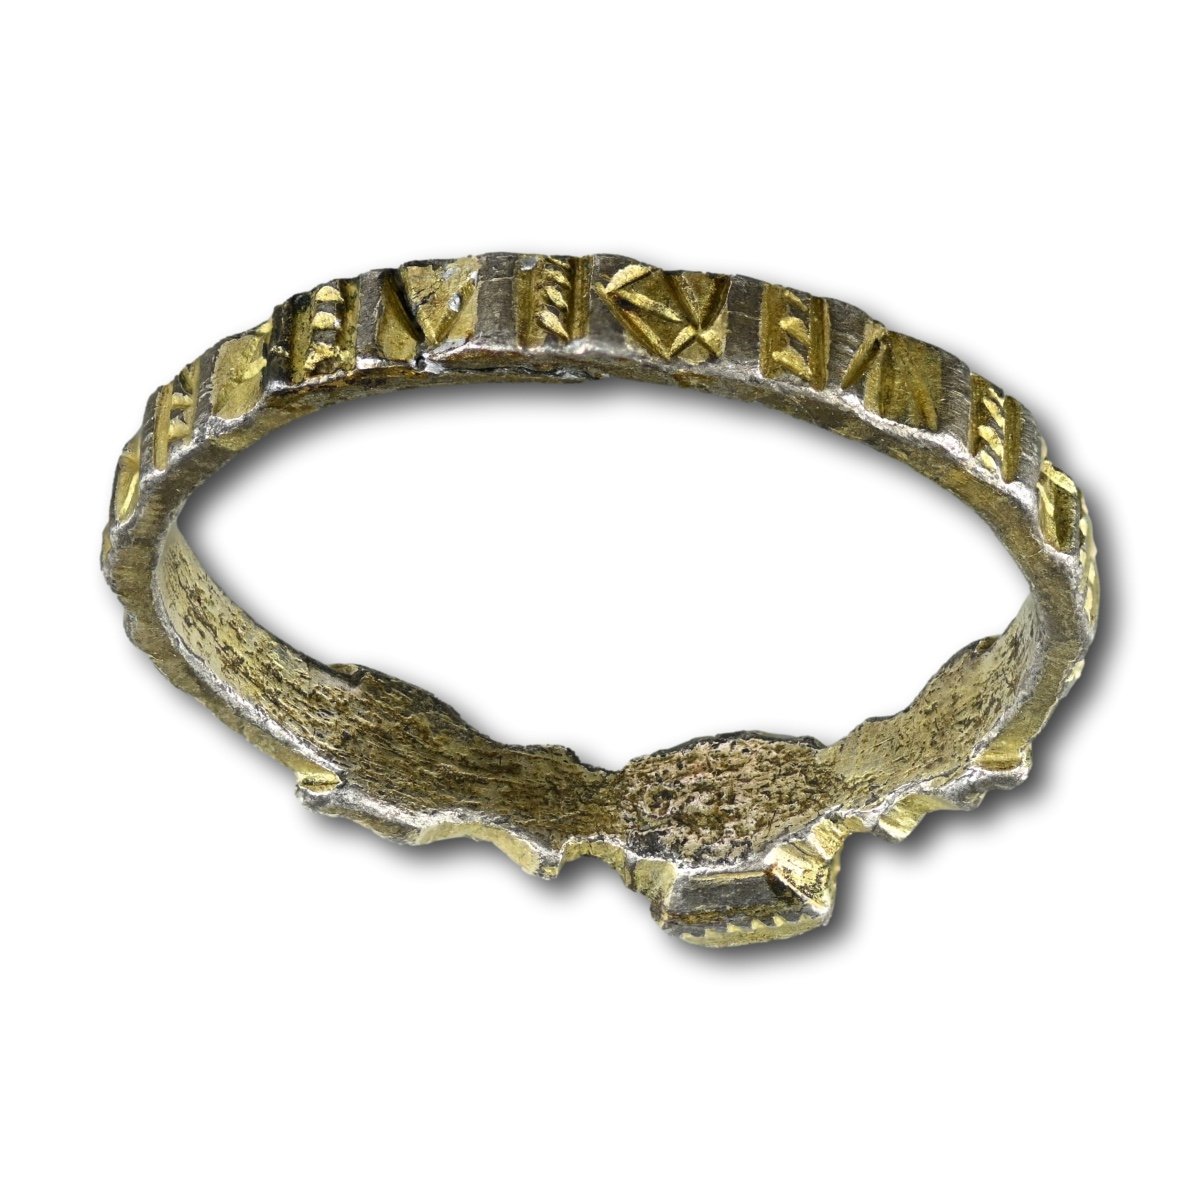 Medieval Silver Gilt And Niello Ring With Dragons. Italian, 13th / 14th Century.-photo-4